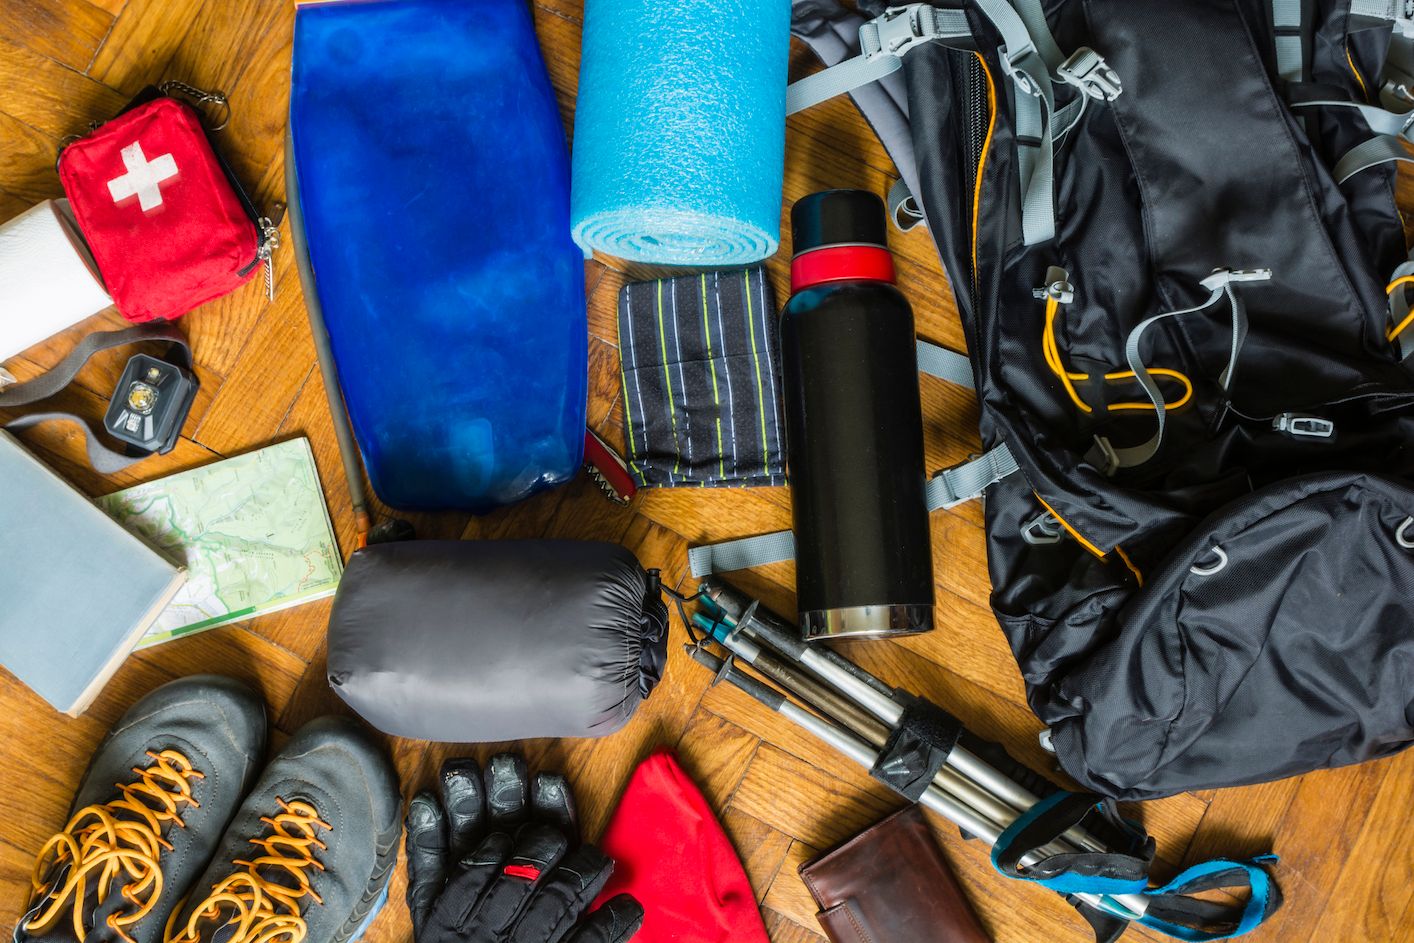 Hiking kit including a rucksack, walking pole, gloves and first aid kit.